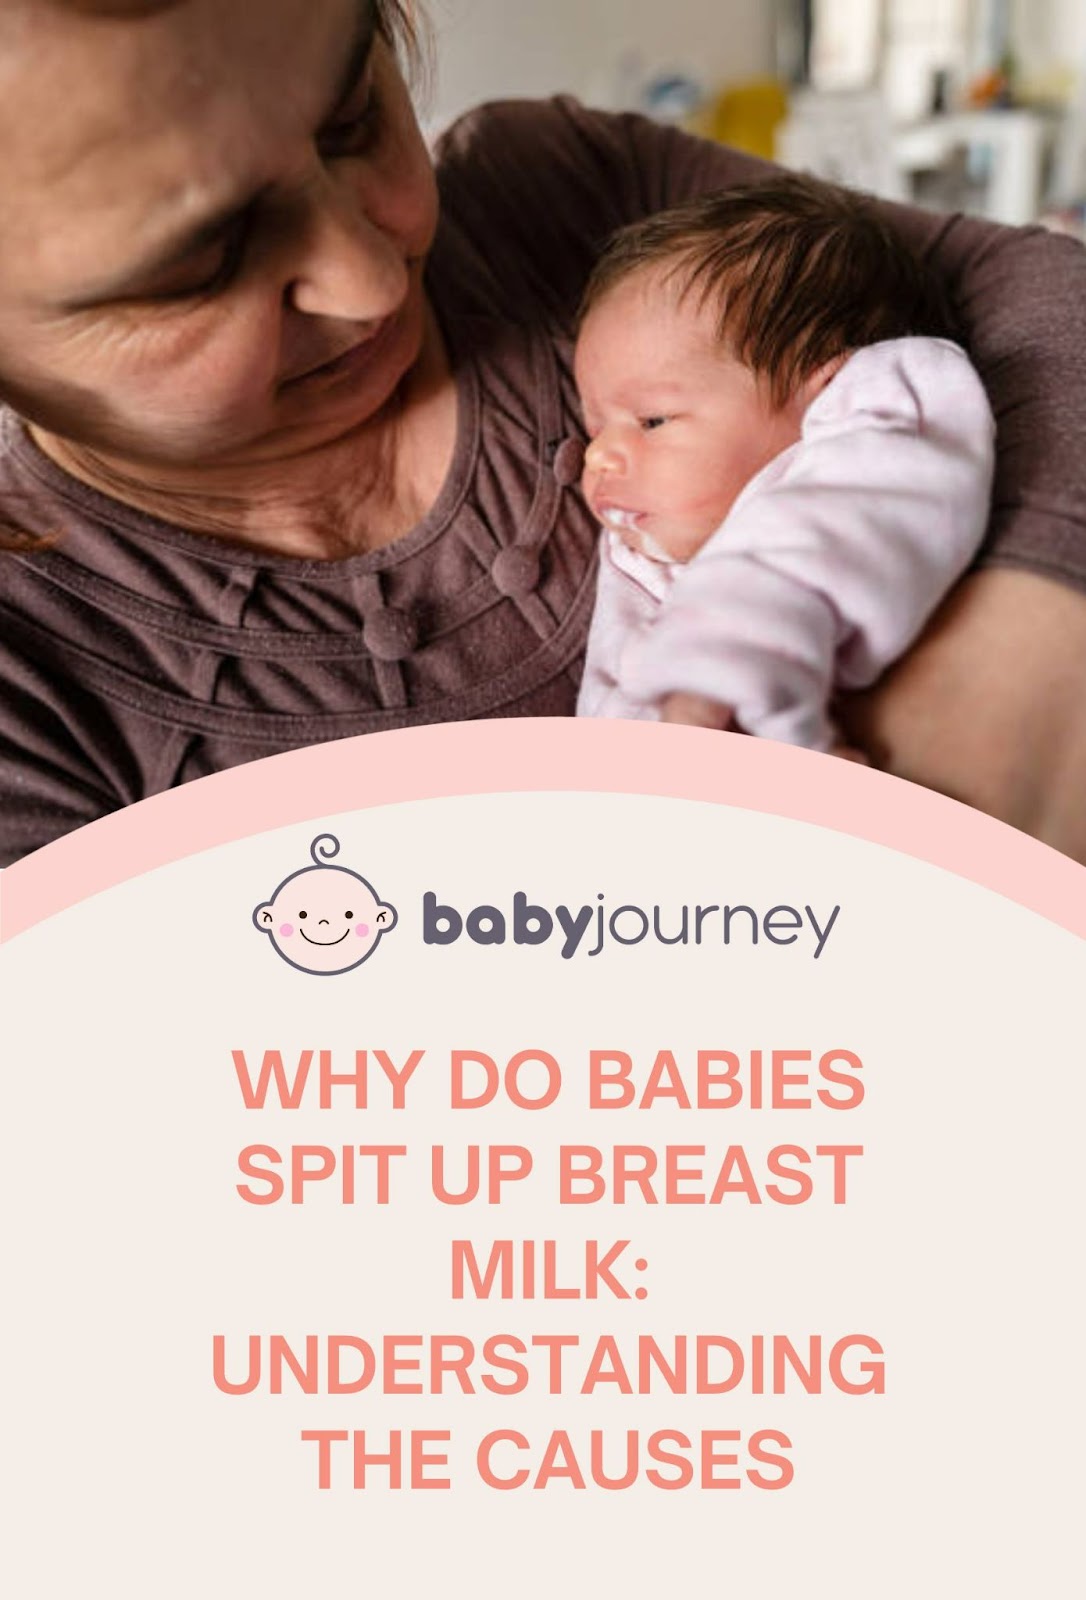 Why Do Baby Spit Up Breast Milk Pinterest - Baby Journey